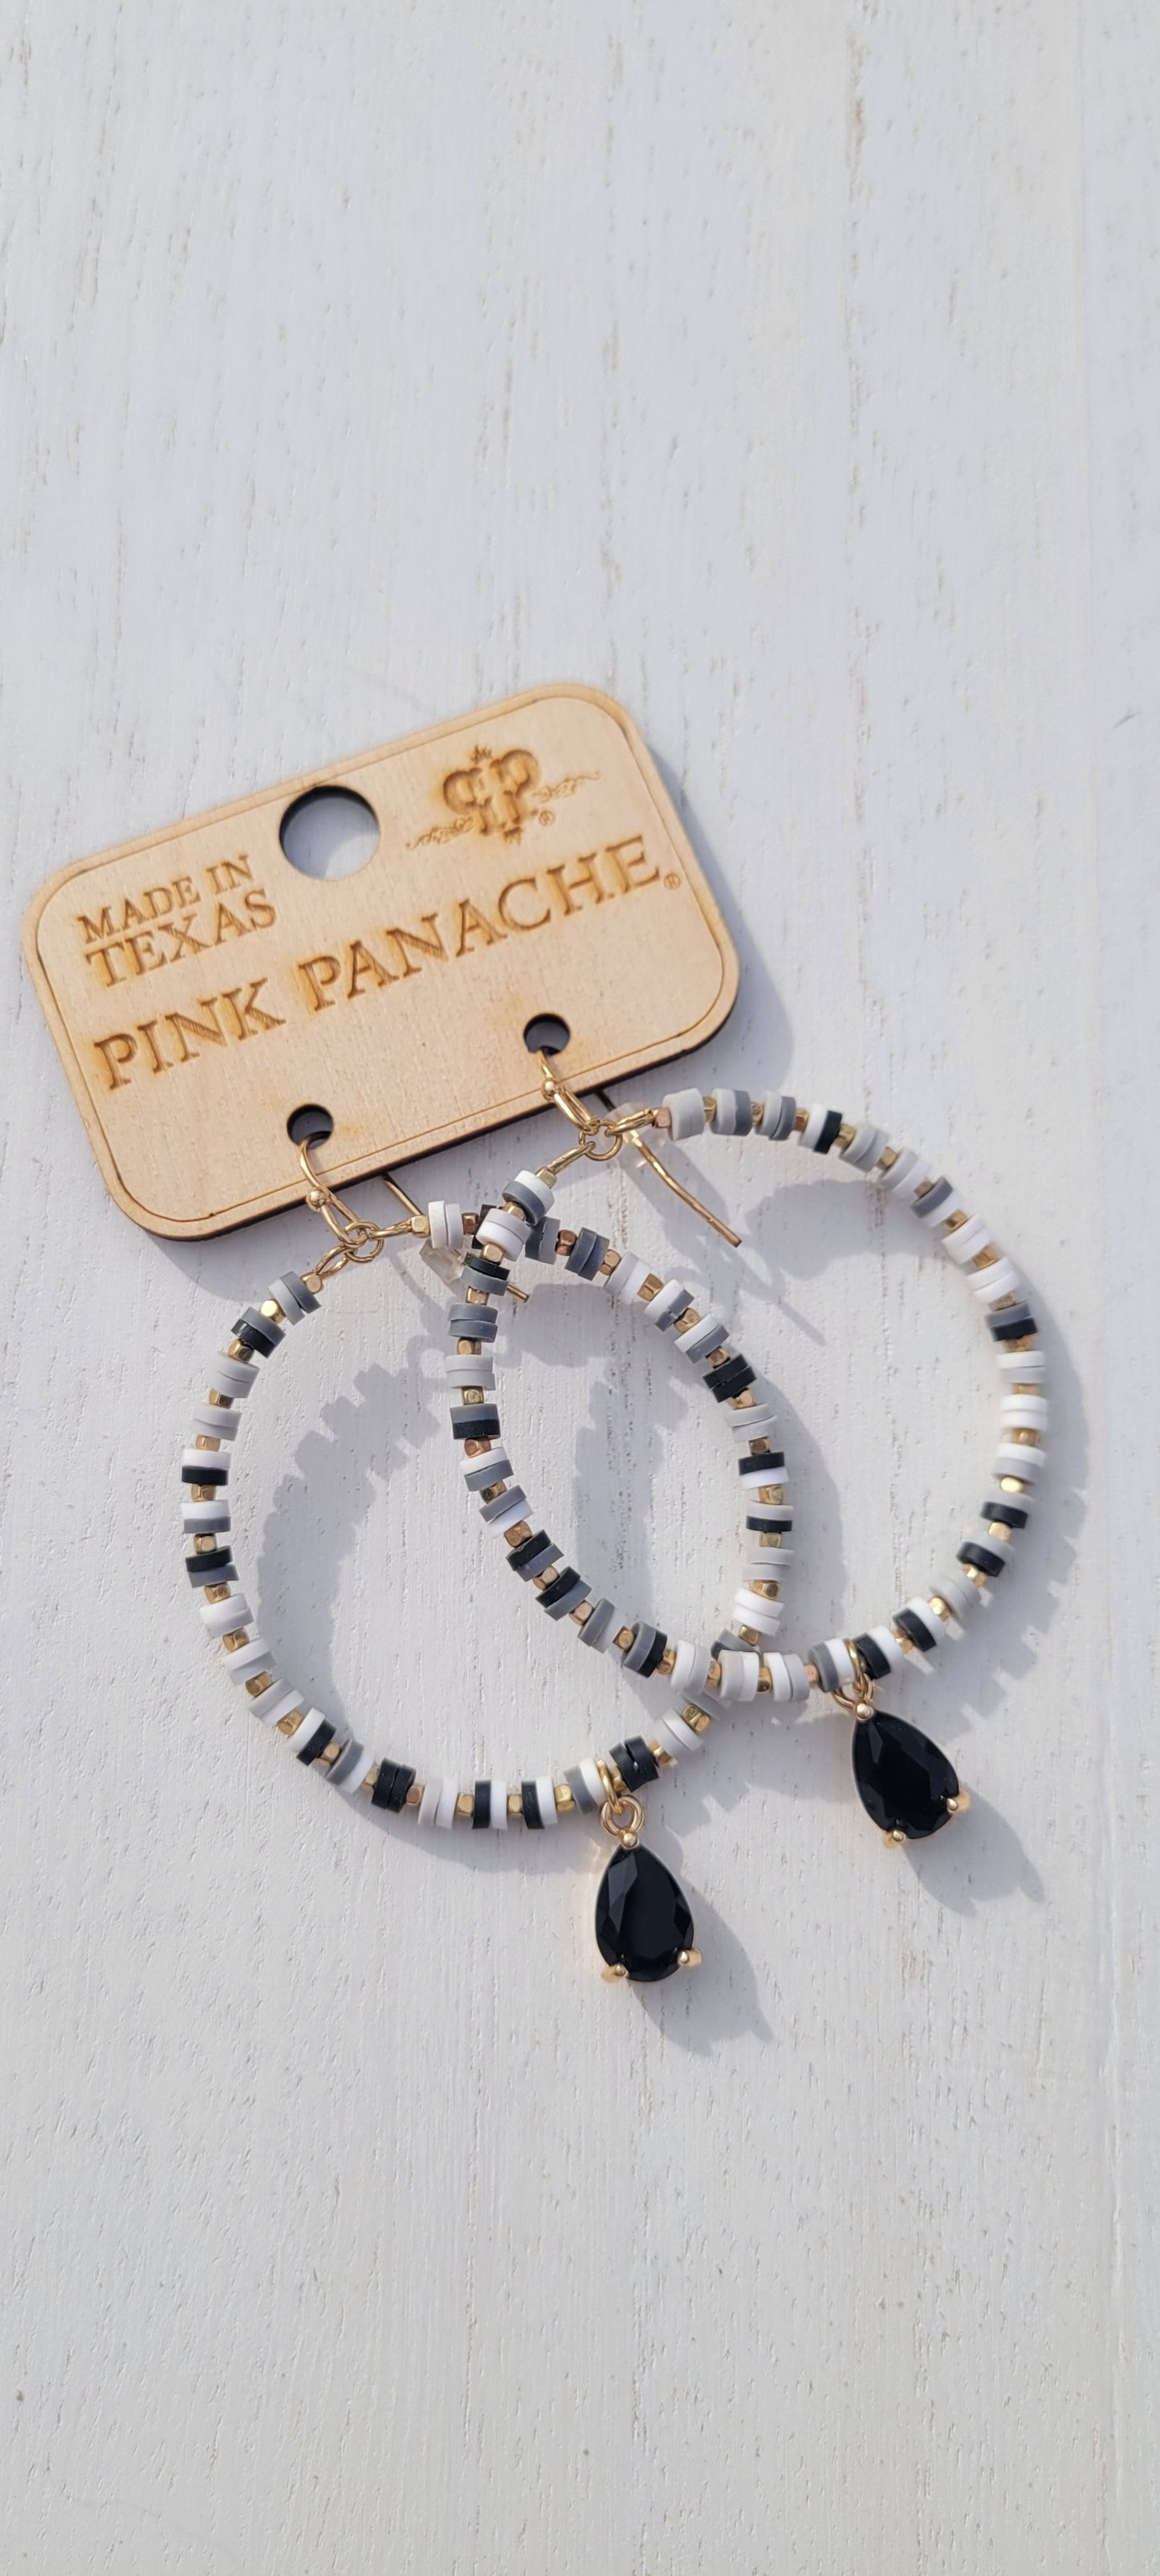 Pink Panache Earrings Color: Black and white rubber bead circle earring with black stone drop Limited supply!   